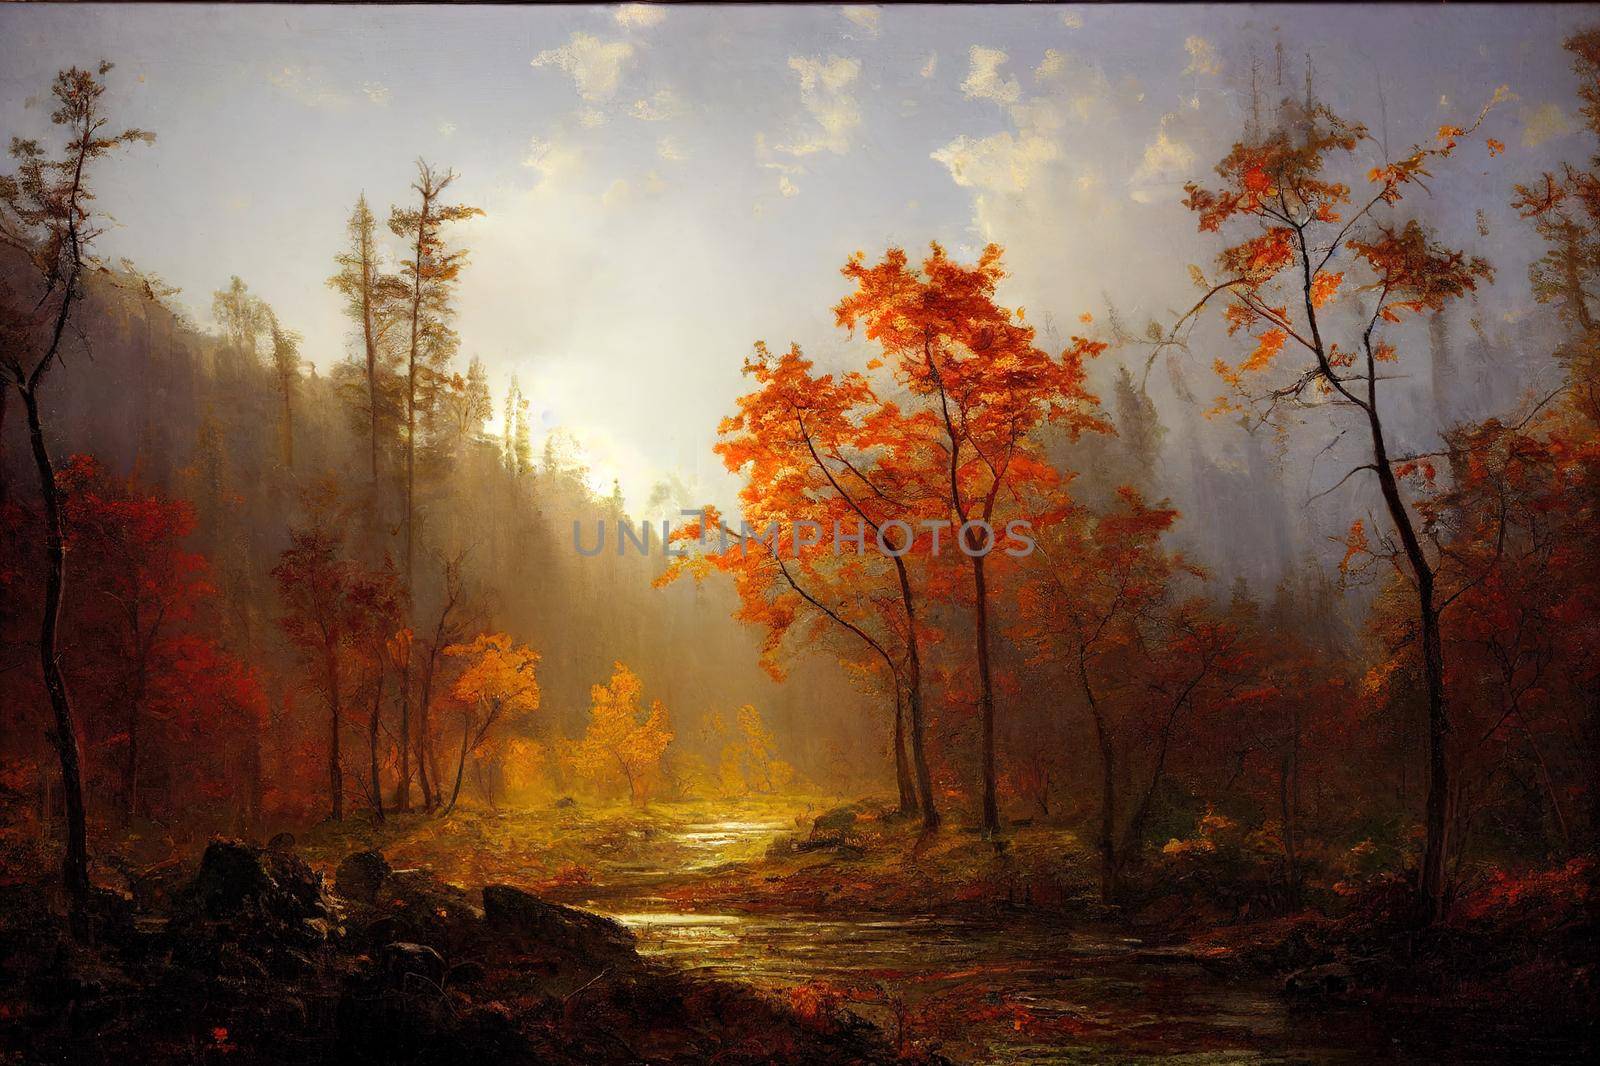 Autumn morning in the forest. High quality illustration